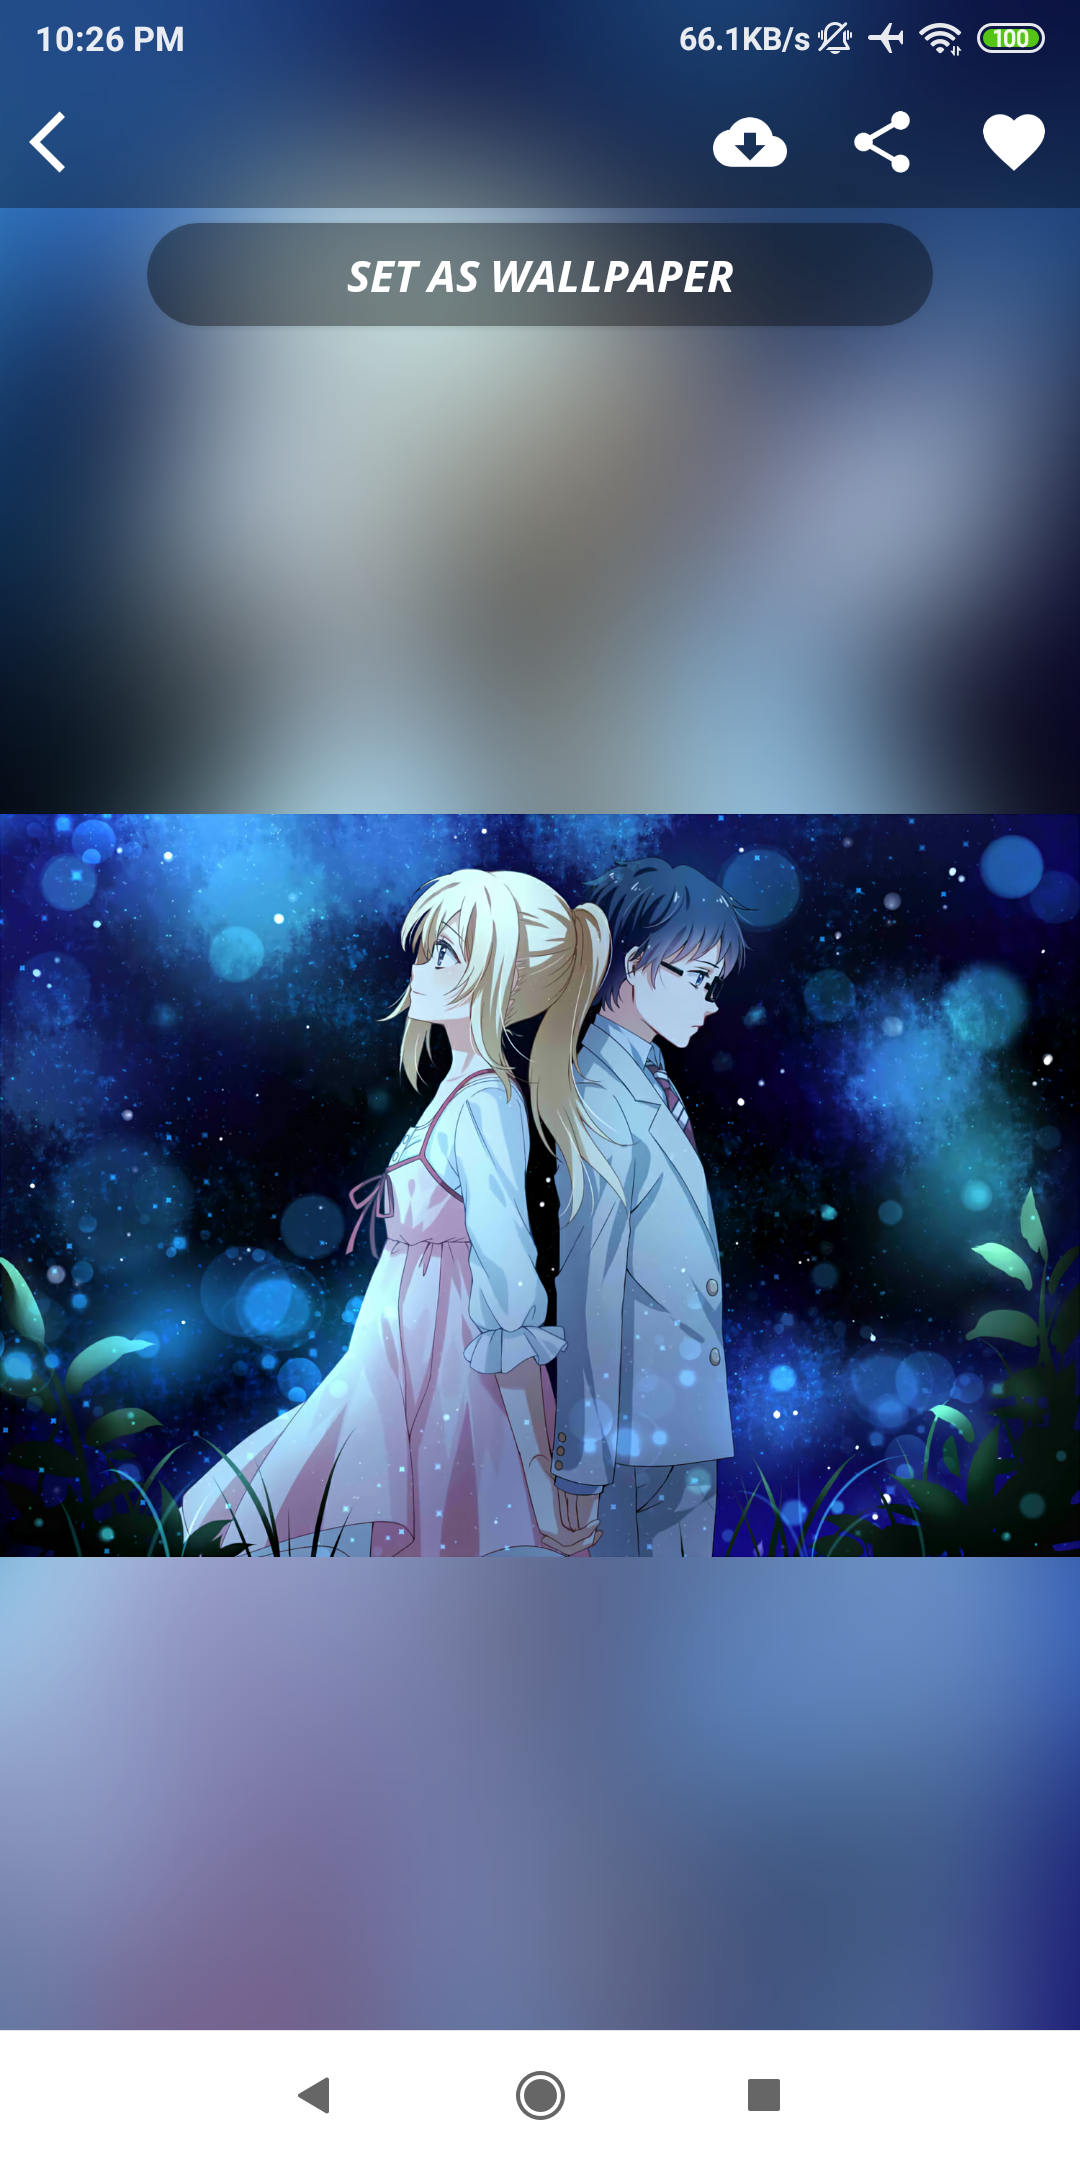 +100000 Anime Wallpaper APK 4.1.3 for Android – Download +100000 Anime